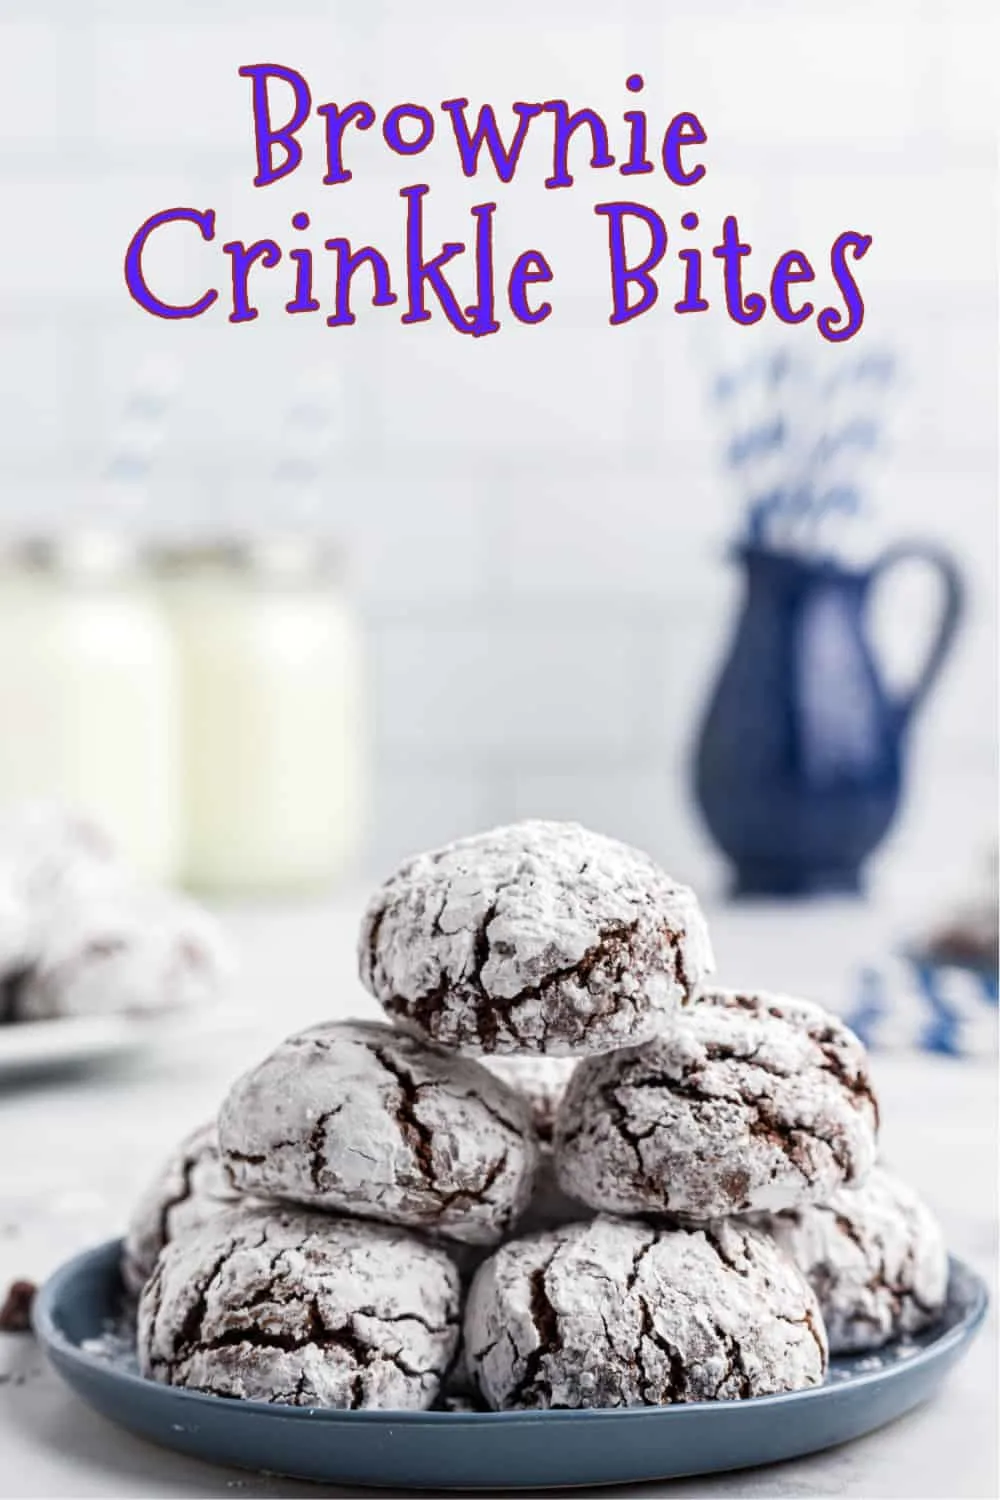 Fudgy, chocolate brownie crinkle bites are a decadent treat for the holidays. Part cookie and part brownie, these rich and chewy bites are rolled in powdered sugar to produce their iconic crinkle on top when baked. via @Mooreorlesscook